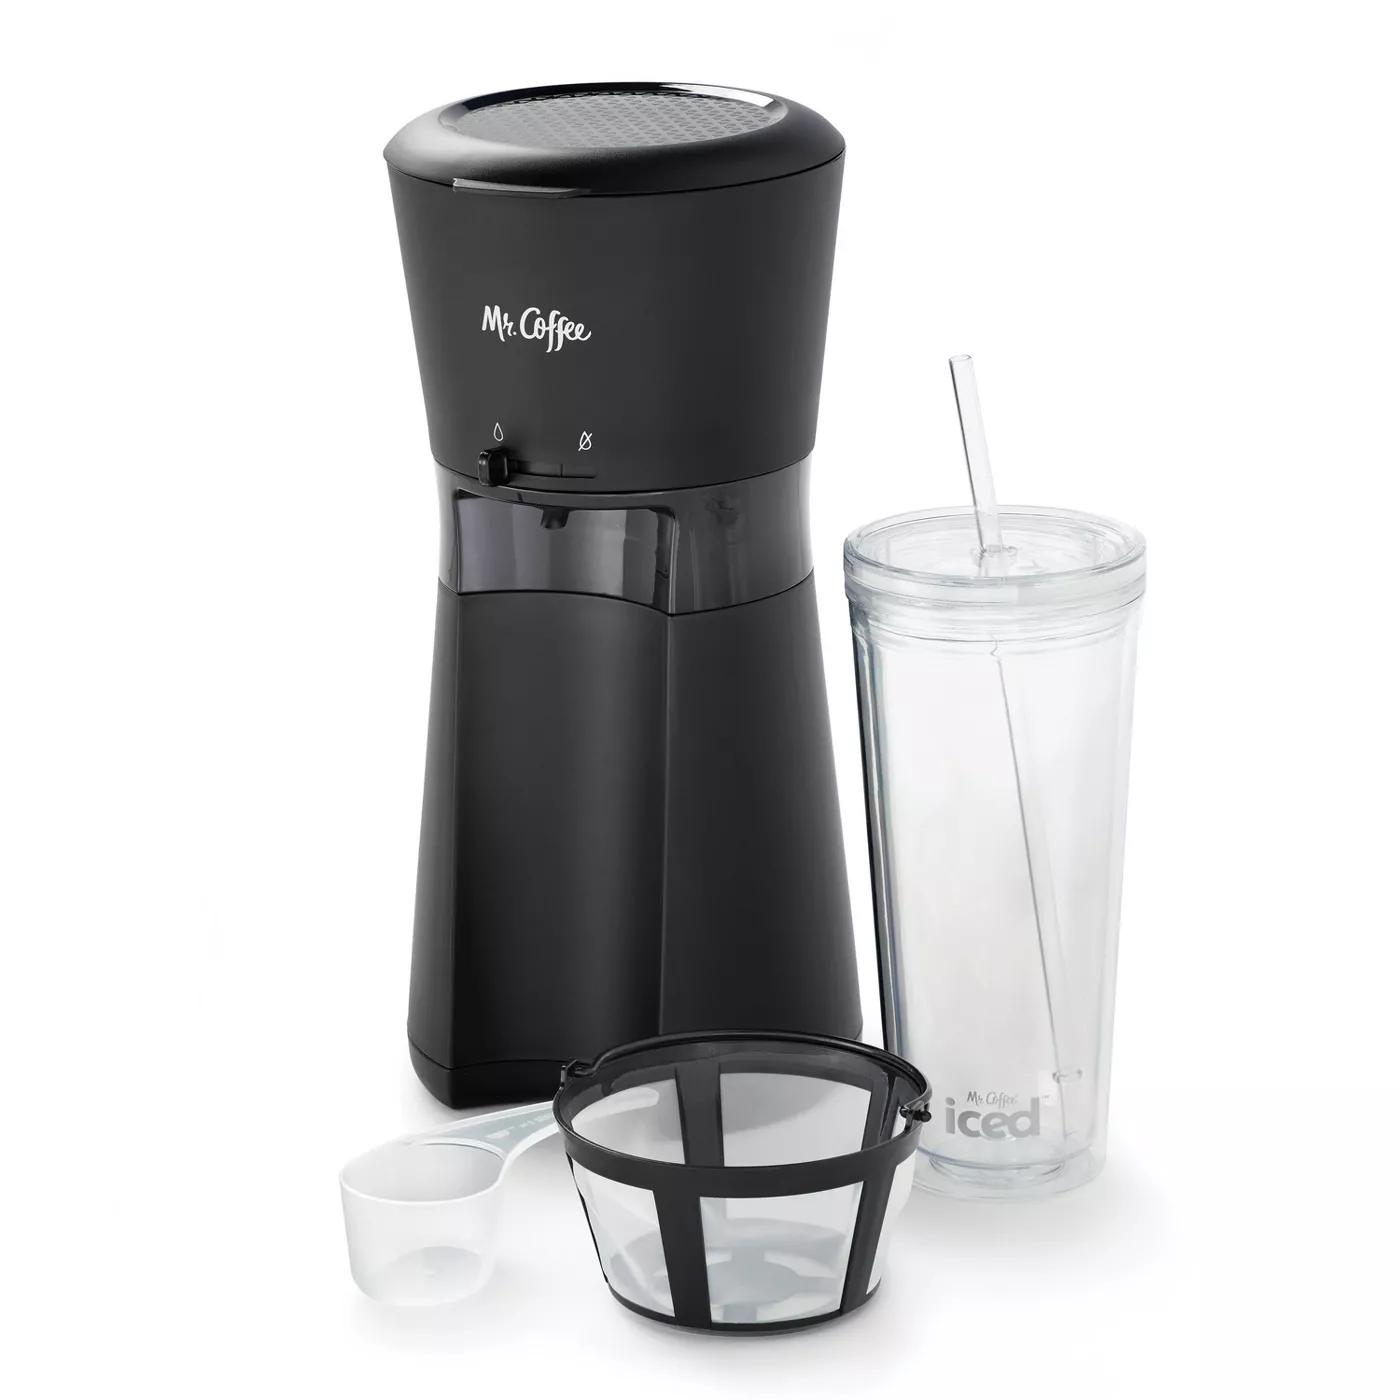 A coffee maker with filter and clear tumbler